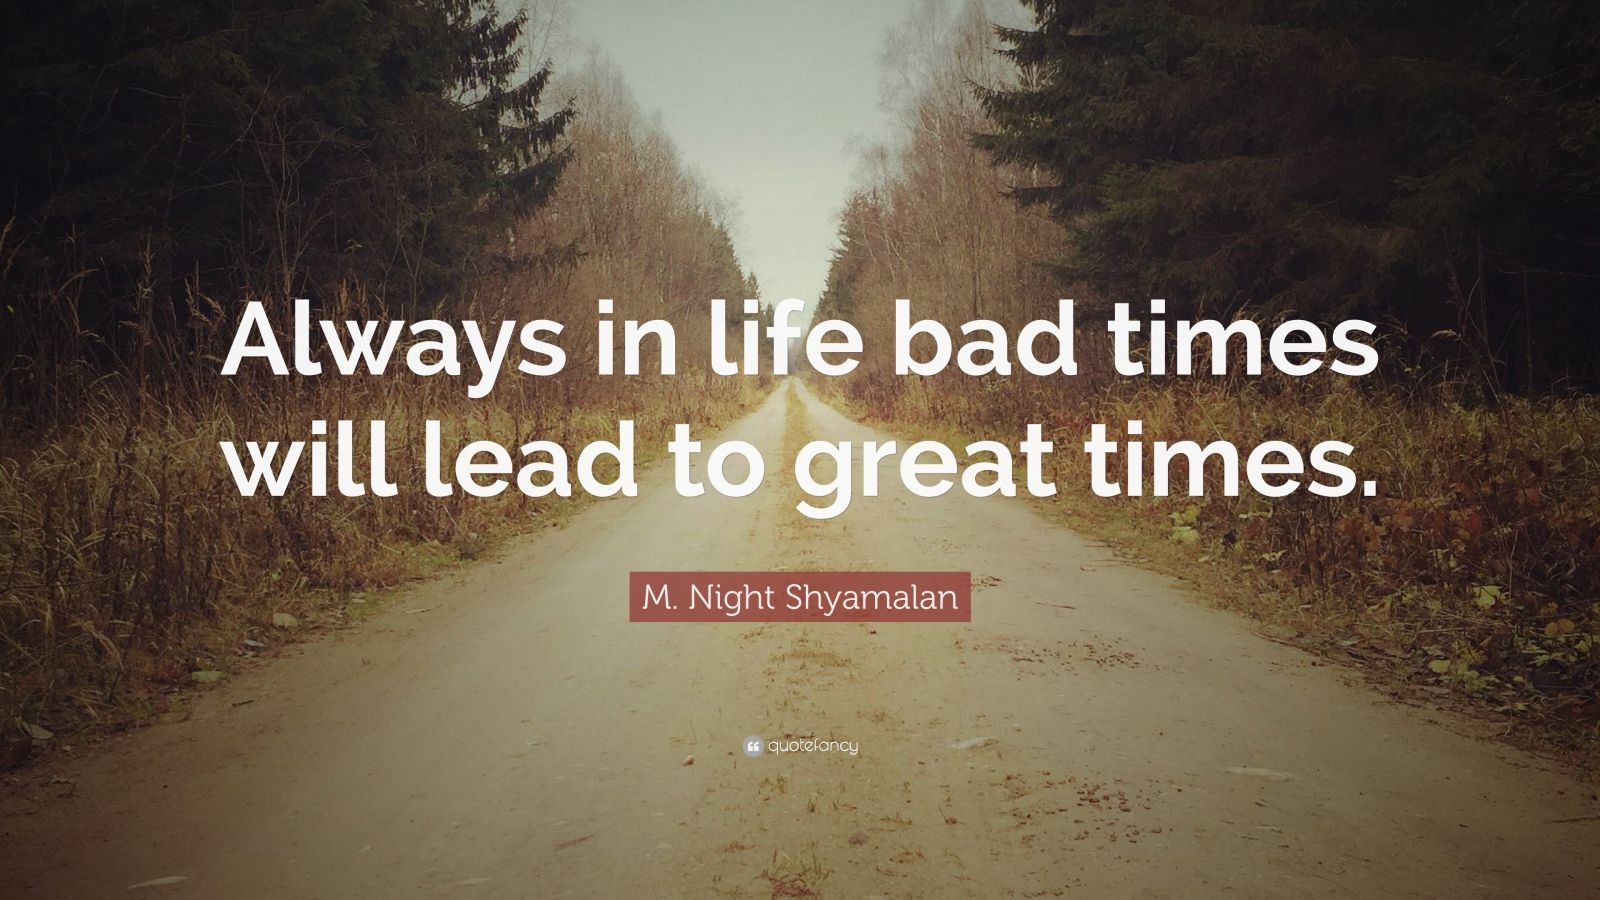 M. Night Shyamalan Quote: “Always in life bad times will lead to great